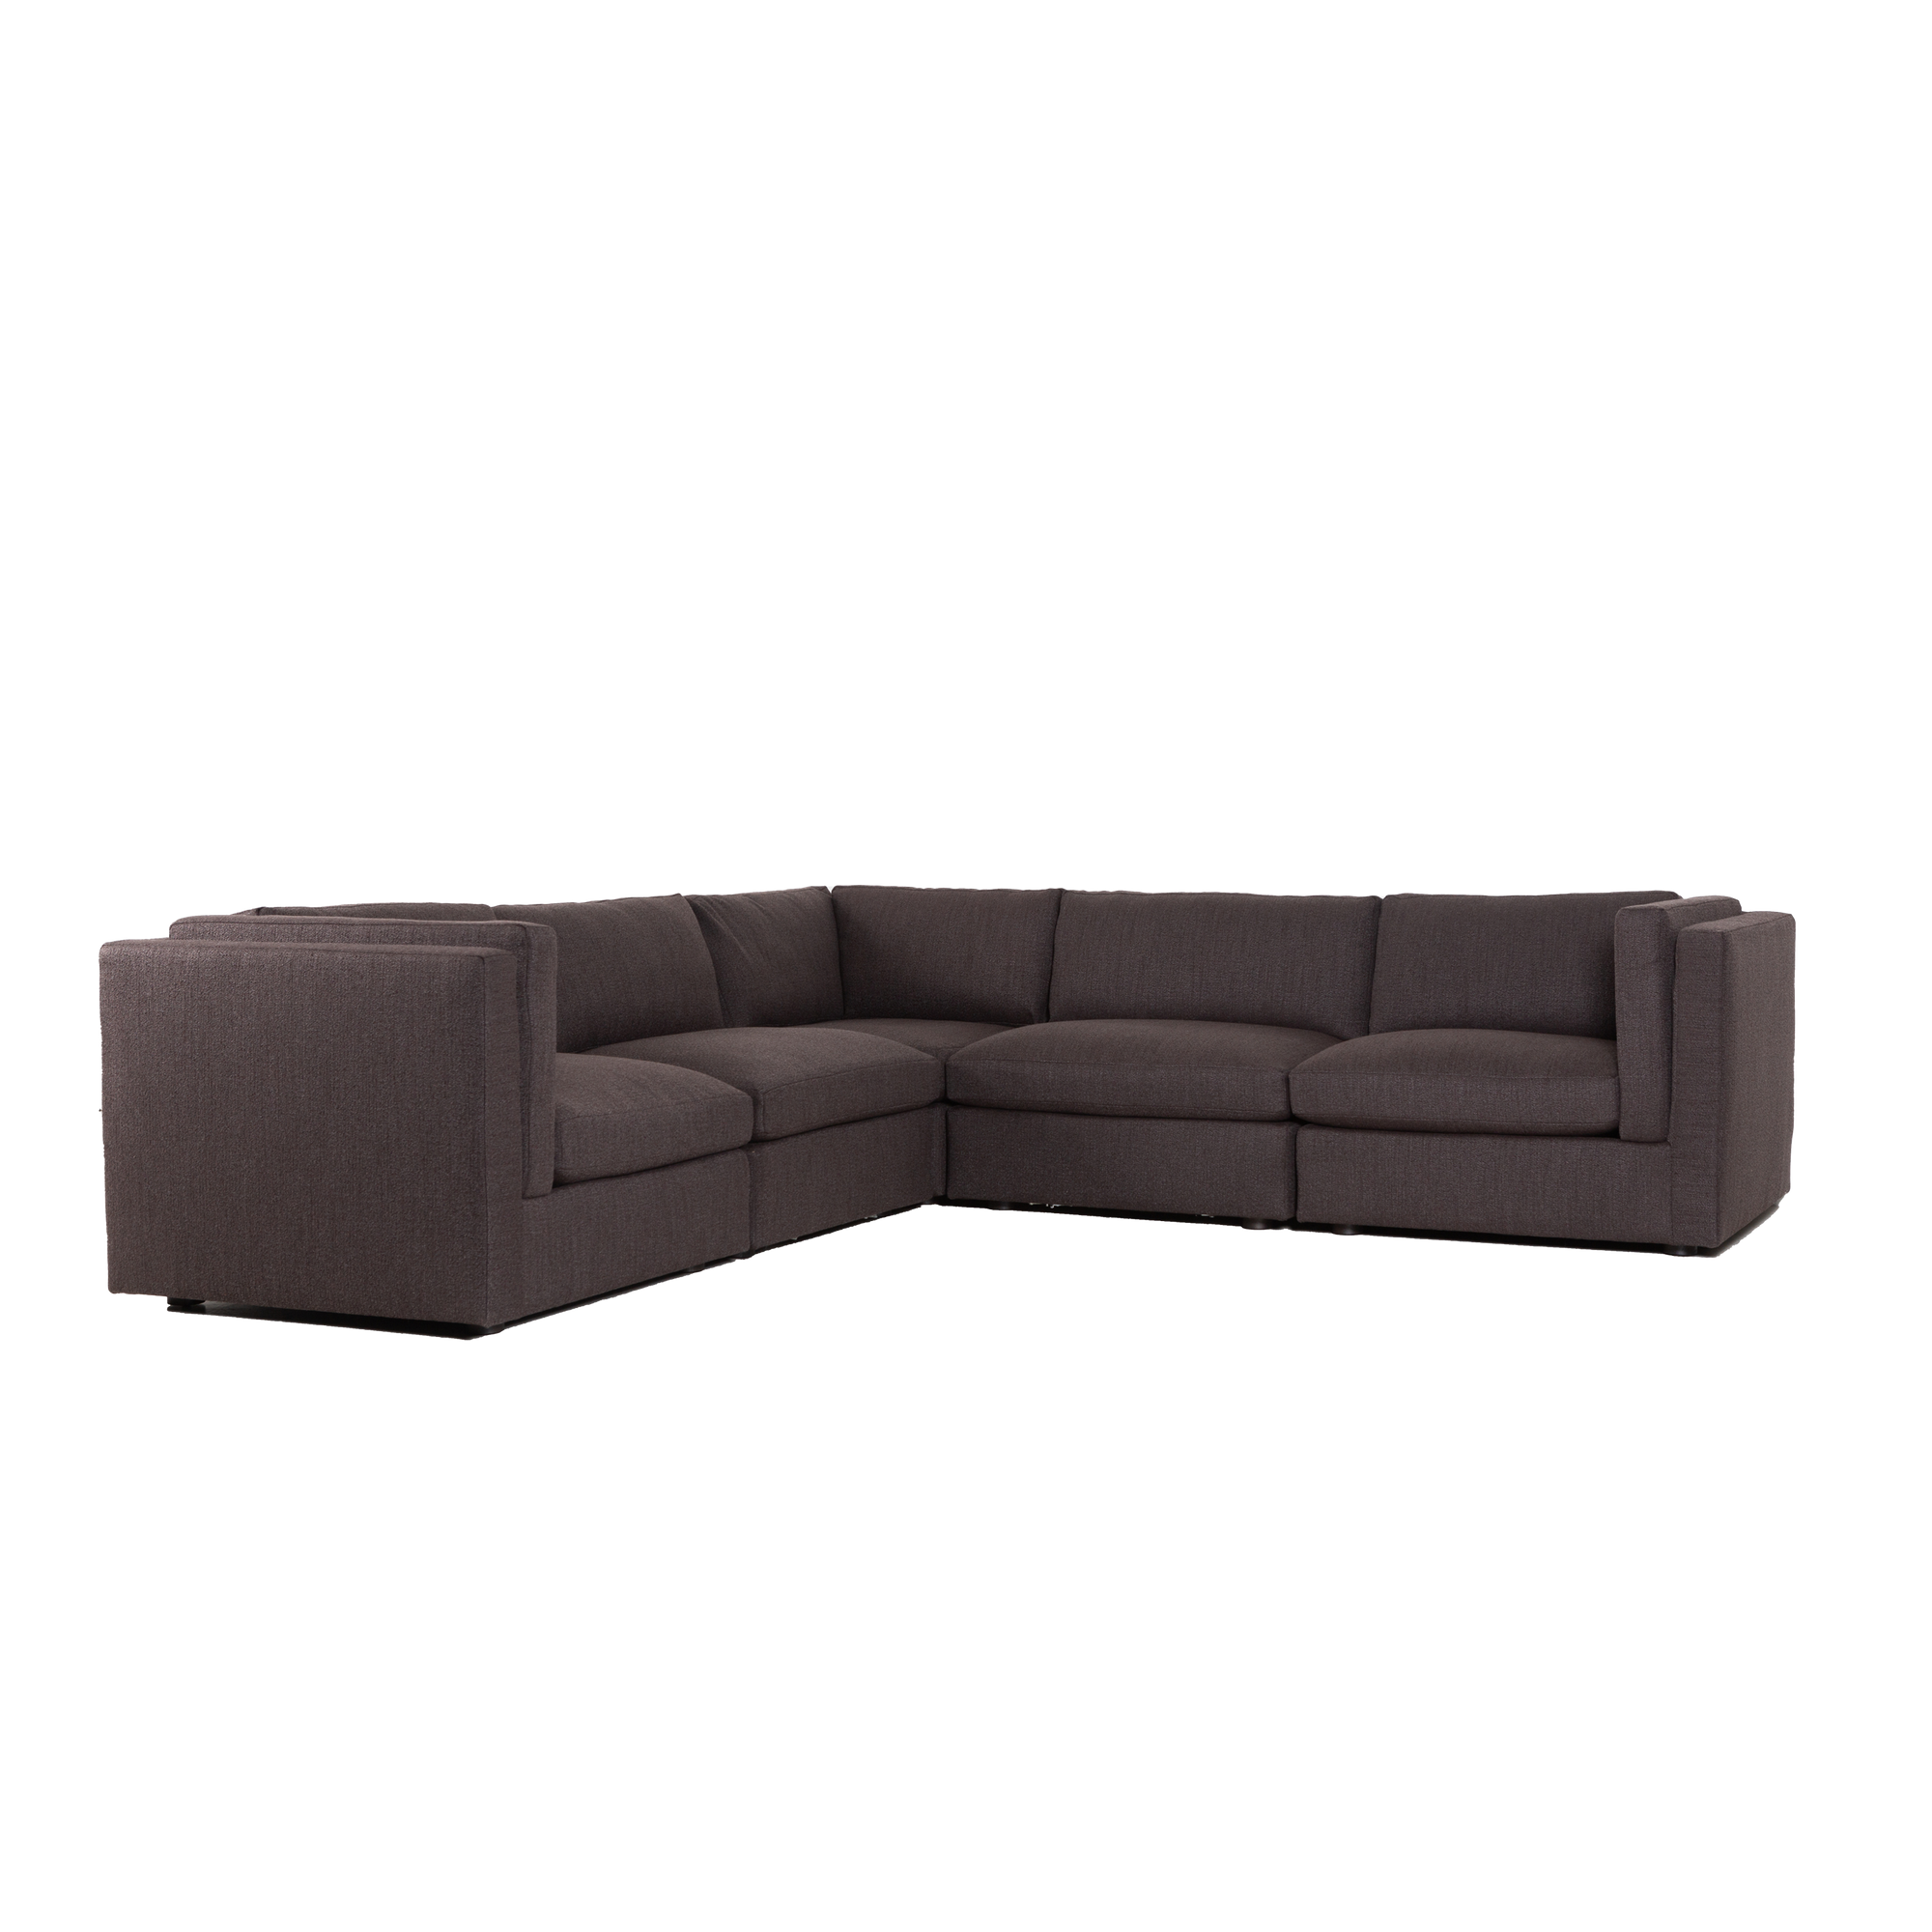 Experience the essence of Danish Modernism reimagined with our Kore Sectional Collection, a tribute to the iconic design legacy of Borge Mogensen.